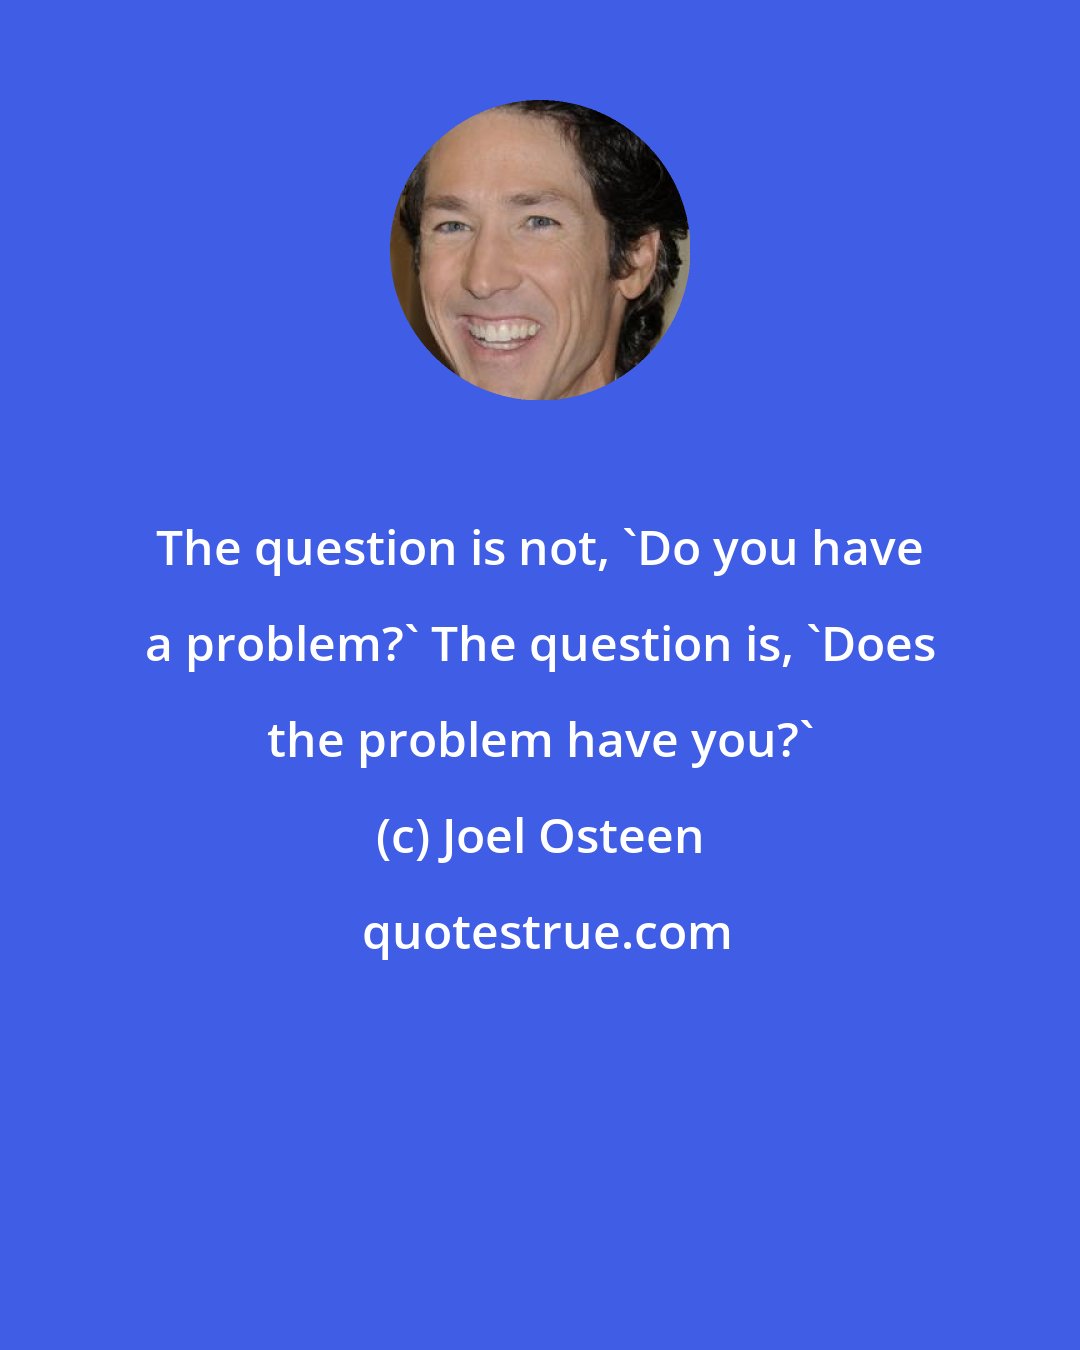 Joel Osteen: The question is not, 'Do you have a problem?' The question is, 'Does the problem have you?'